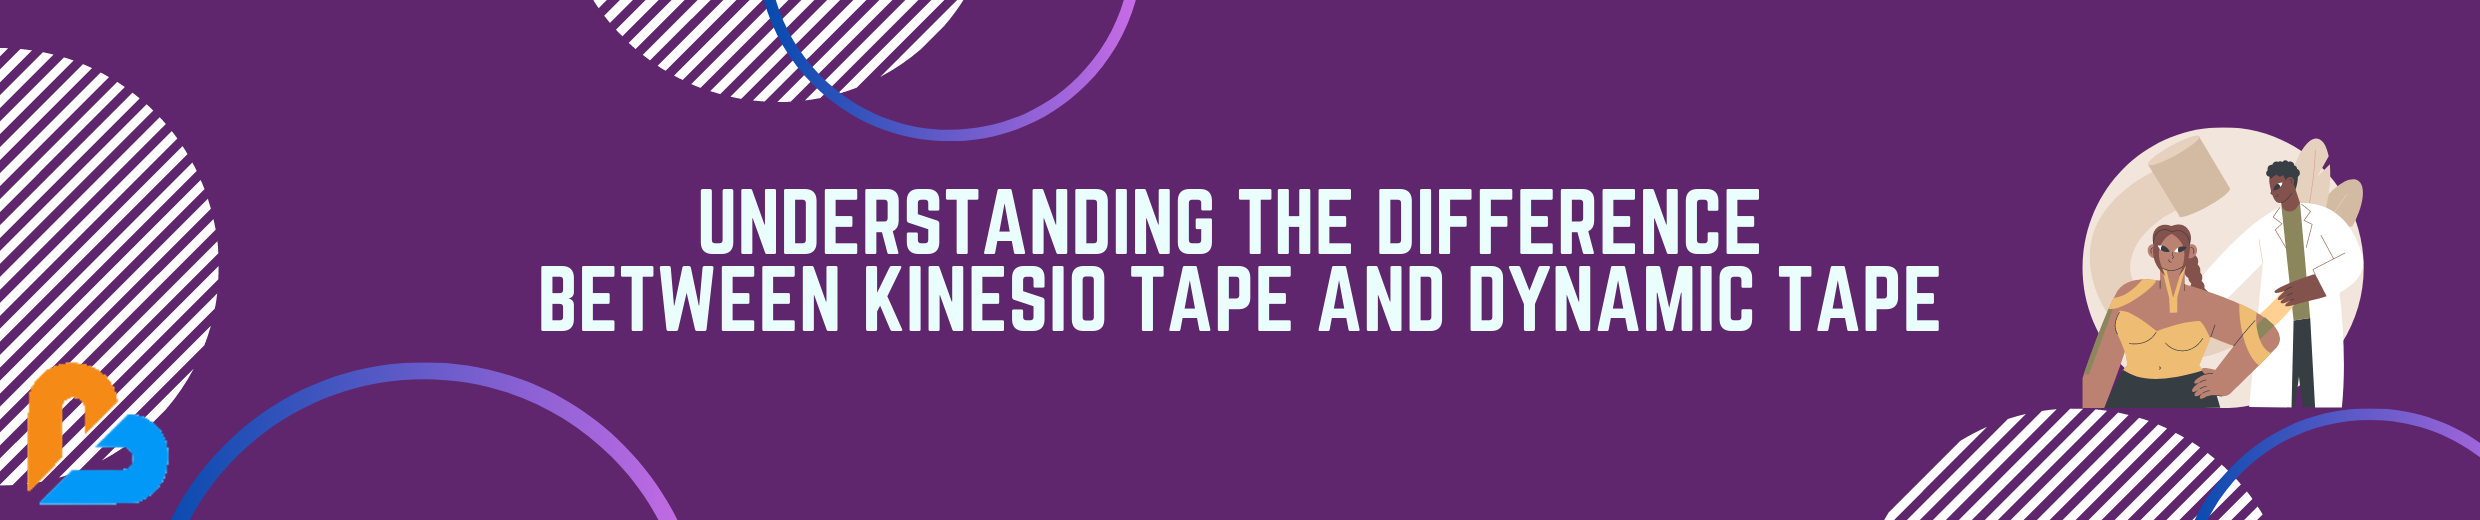 Understanding the Difference Between Kinesio Tape and Dynamic Tape